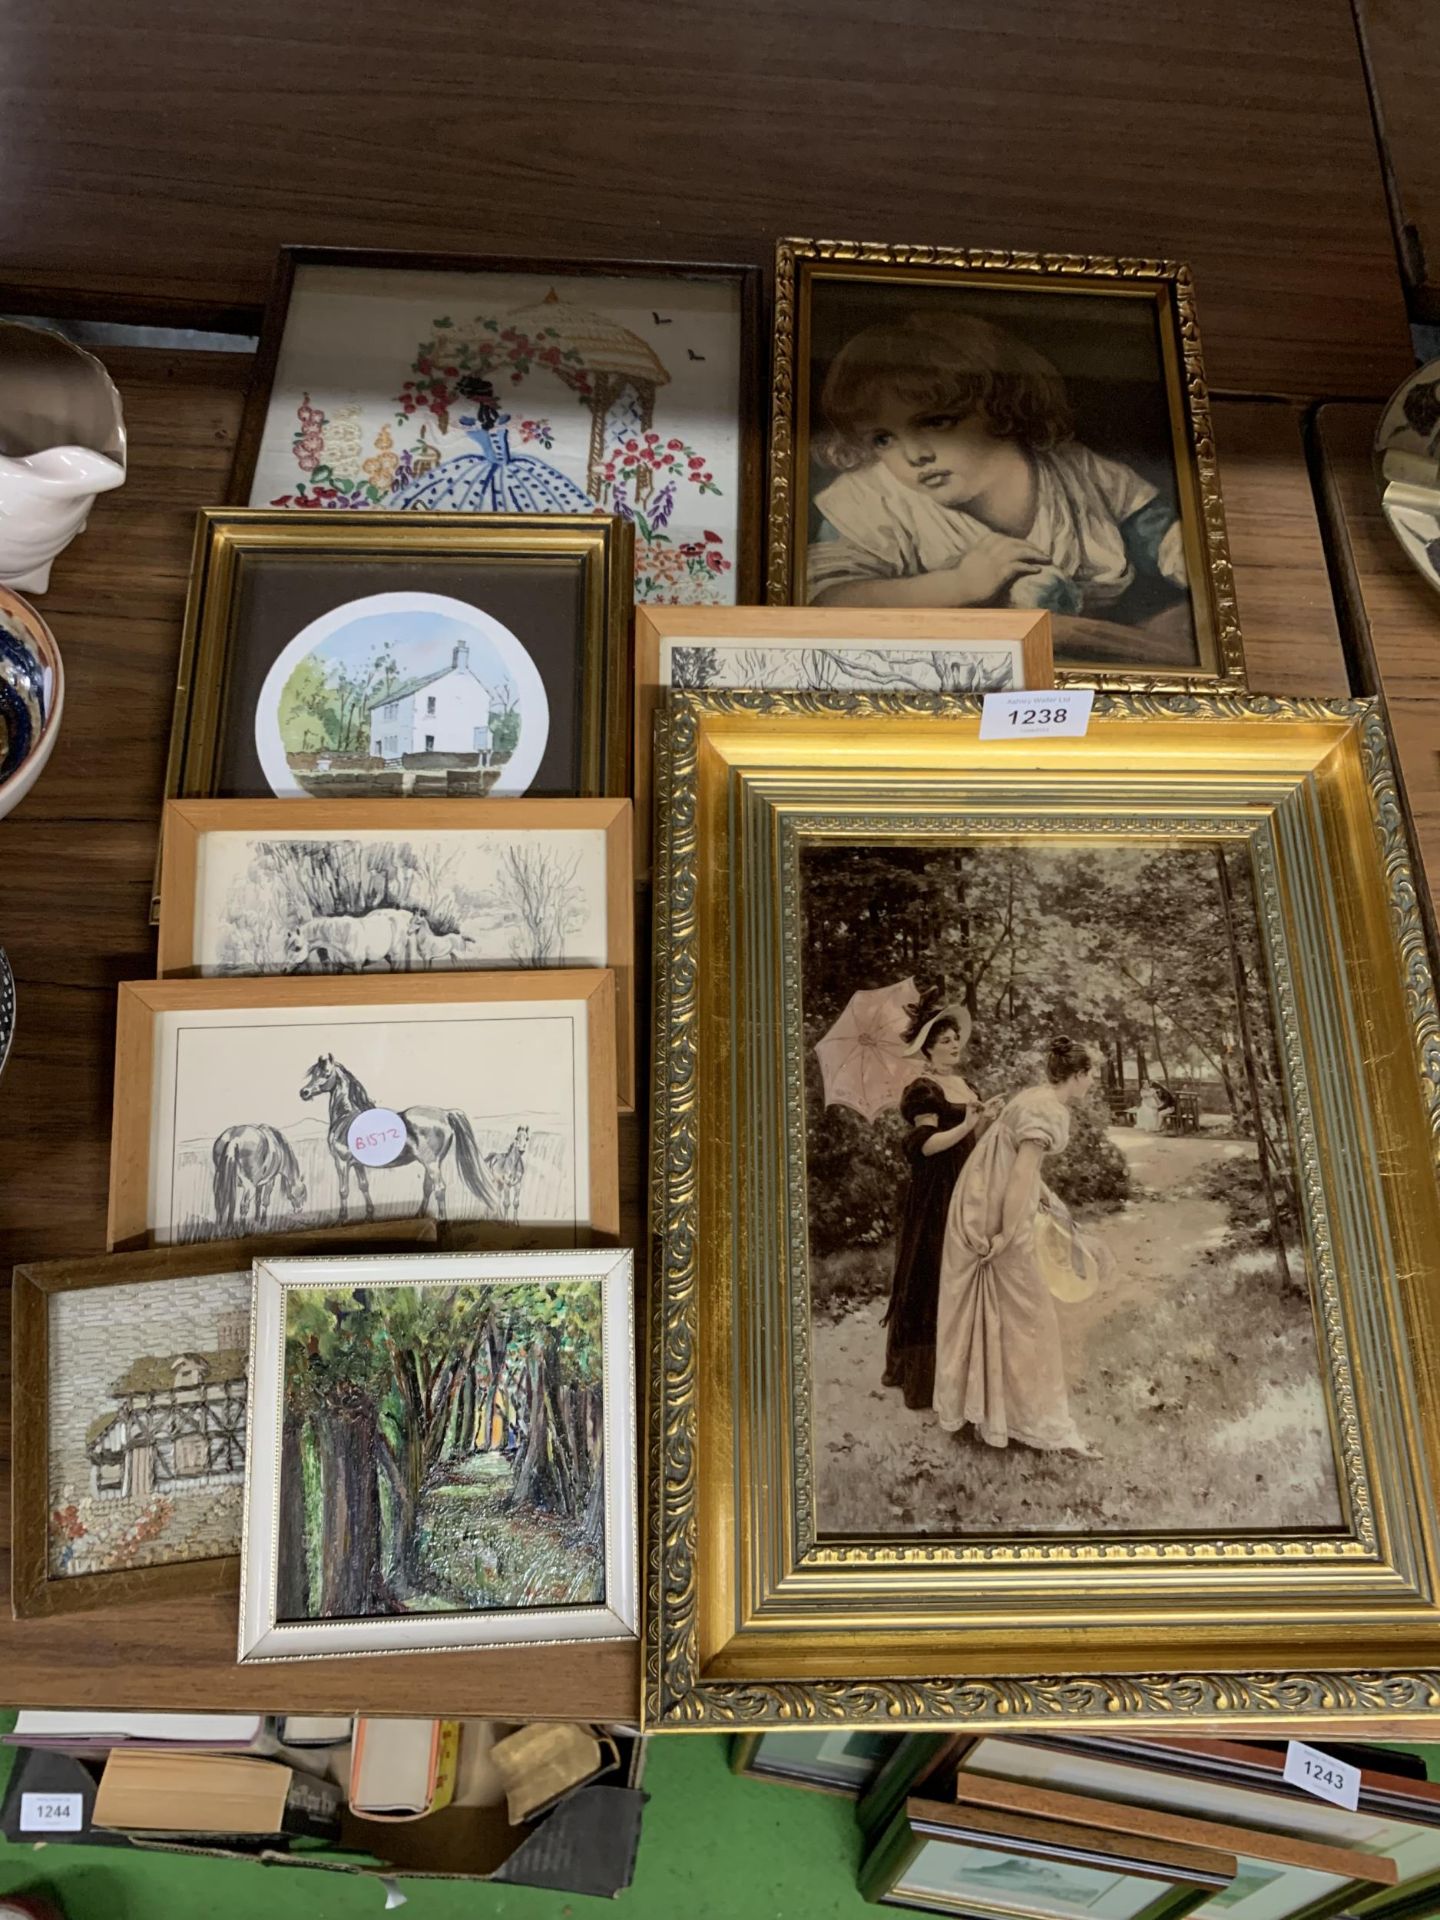 THREE FRAMED PENCIL DRAWINGS OF HORSES IN THE NEW FOREST TOGETHER WITH TWO FRAMED NEEDLEWORKS, A